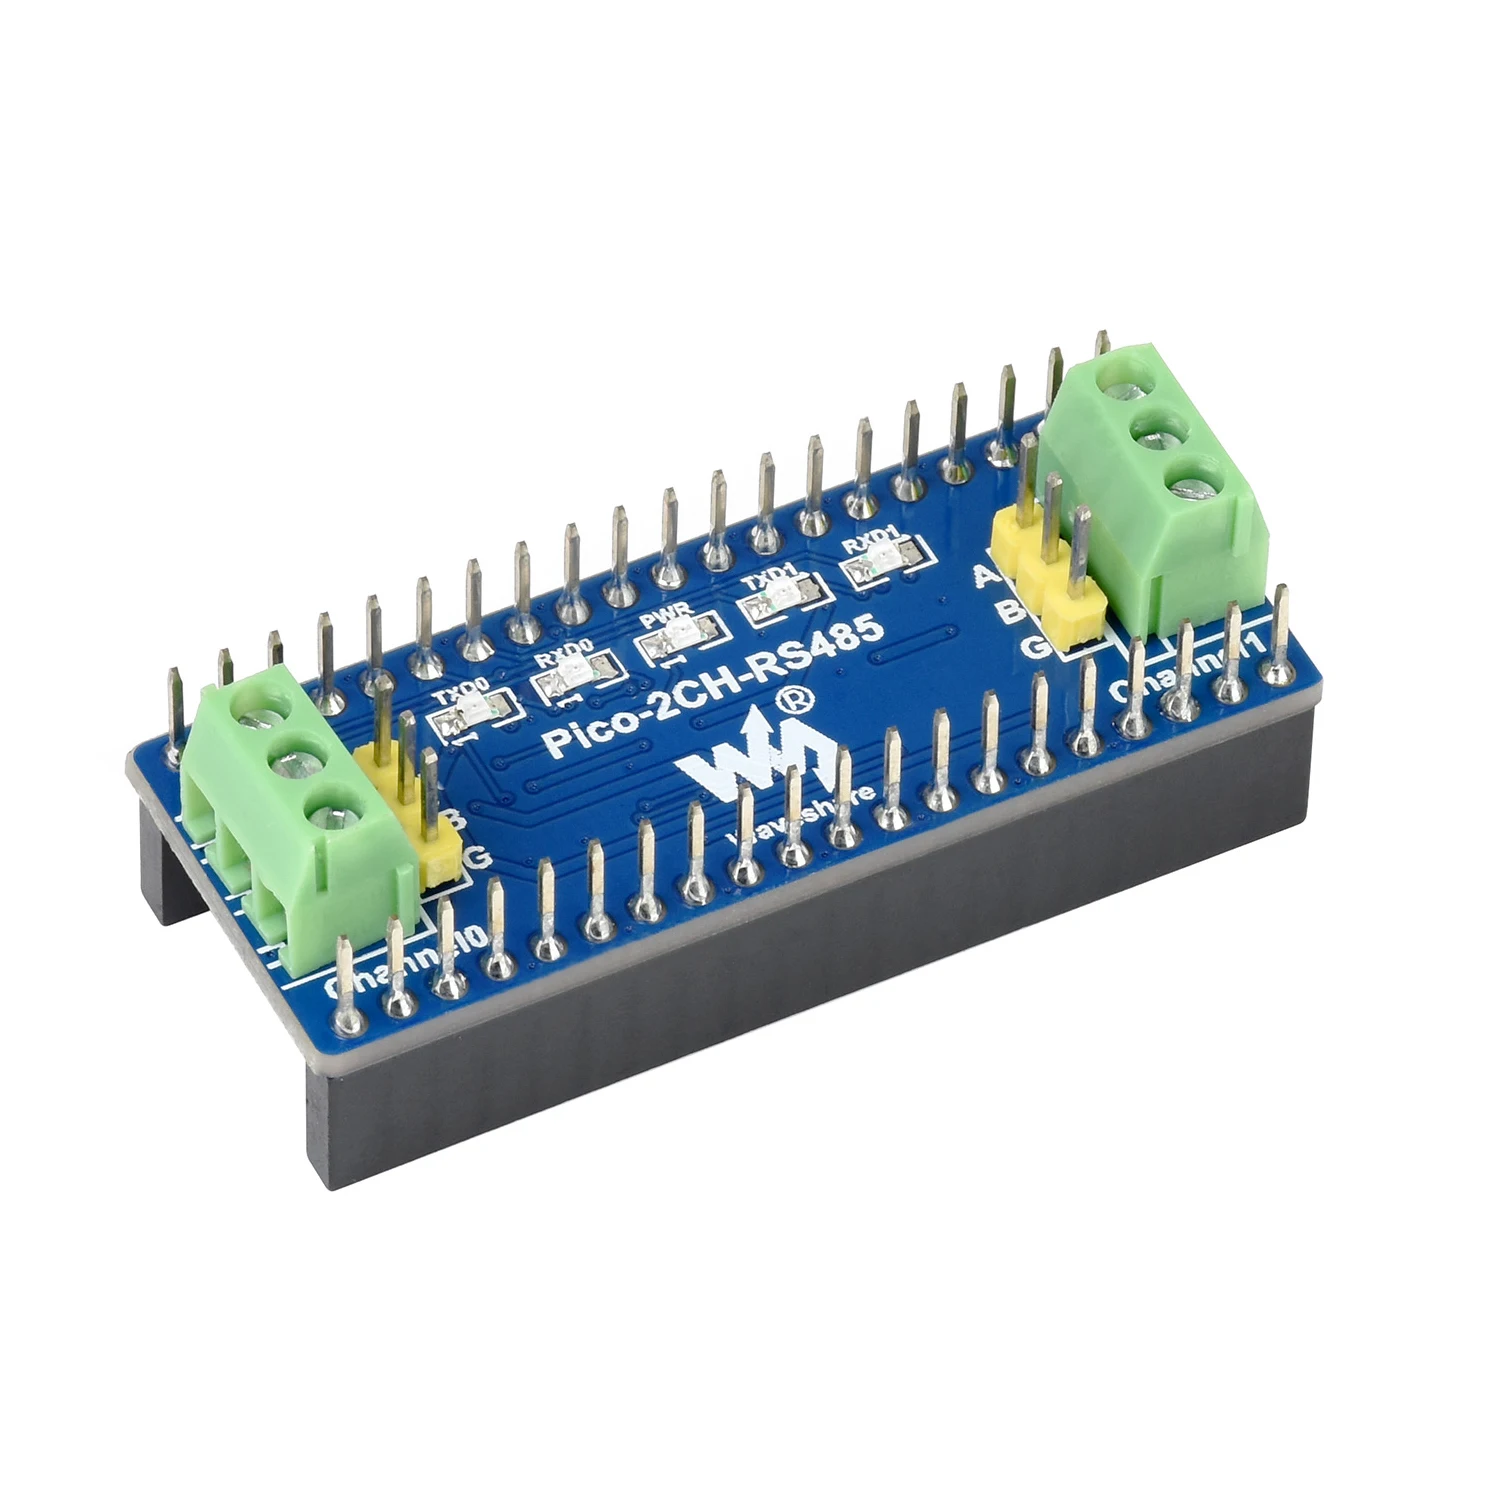 

2-Channel RS485 Expansion Module HAT Breakout Shield for RPI Raspberry Pi PICO W H WH RP2040 Development Board Accessories